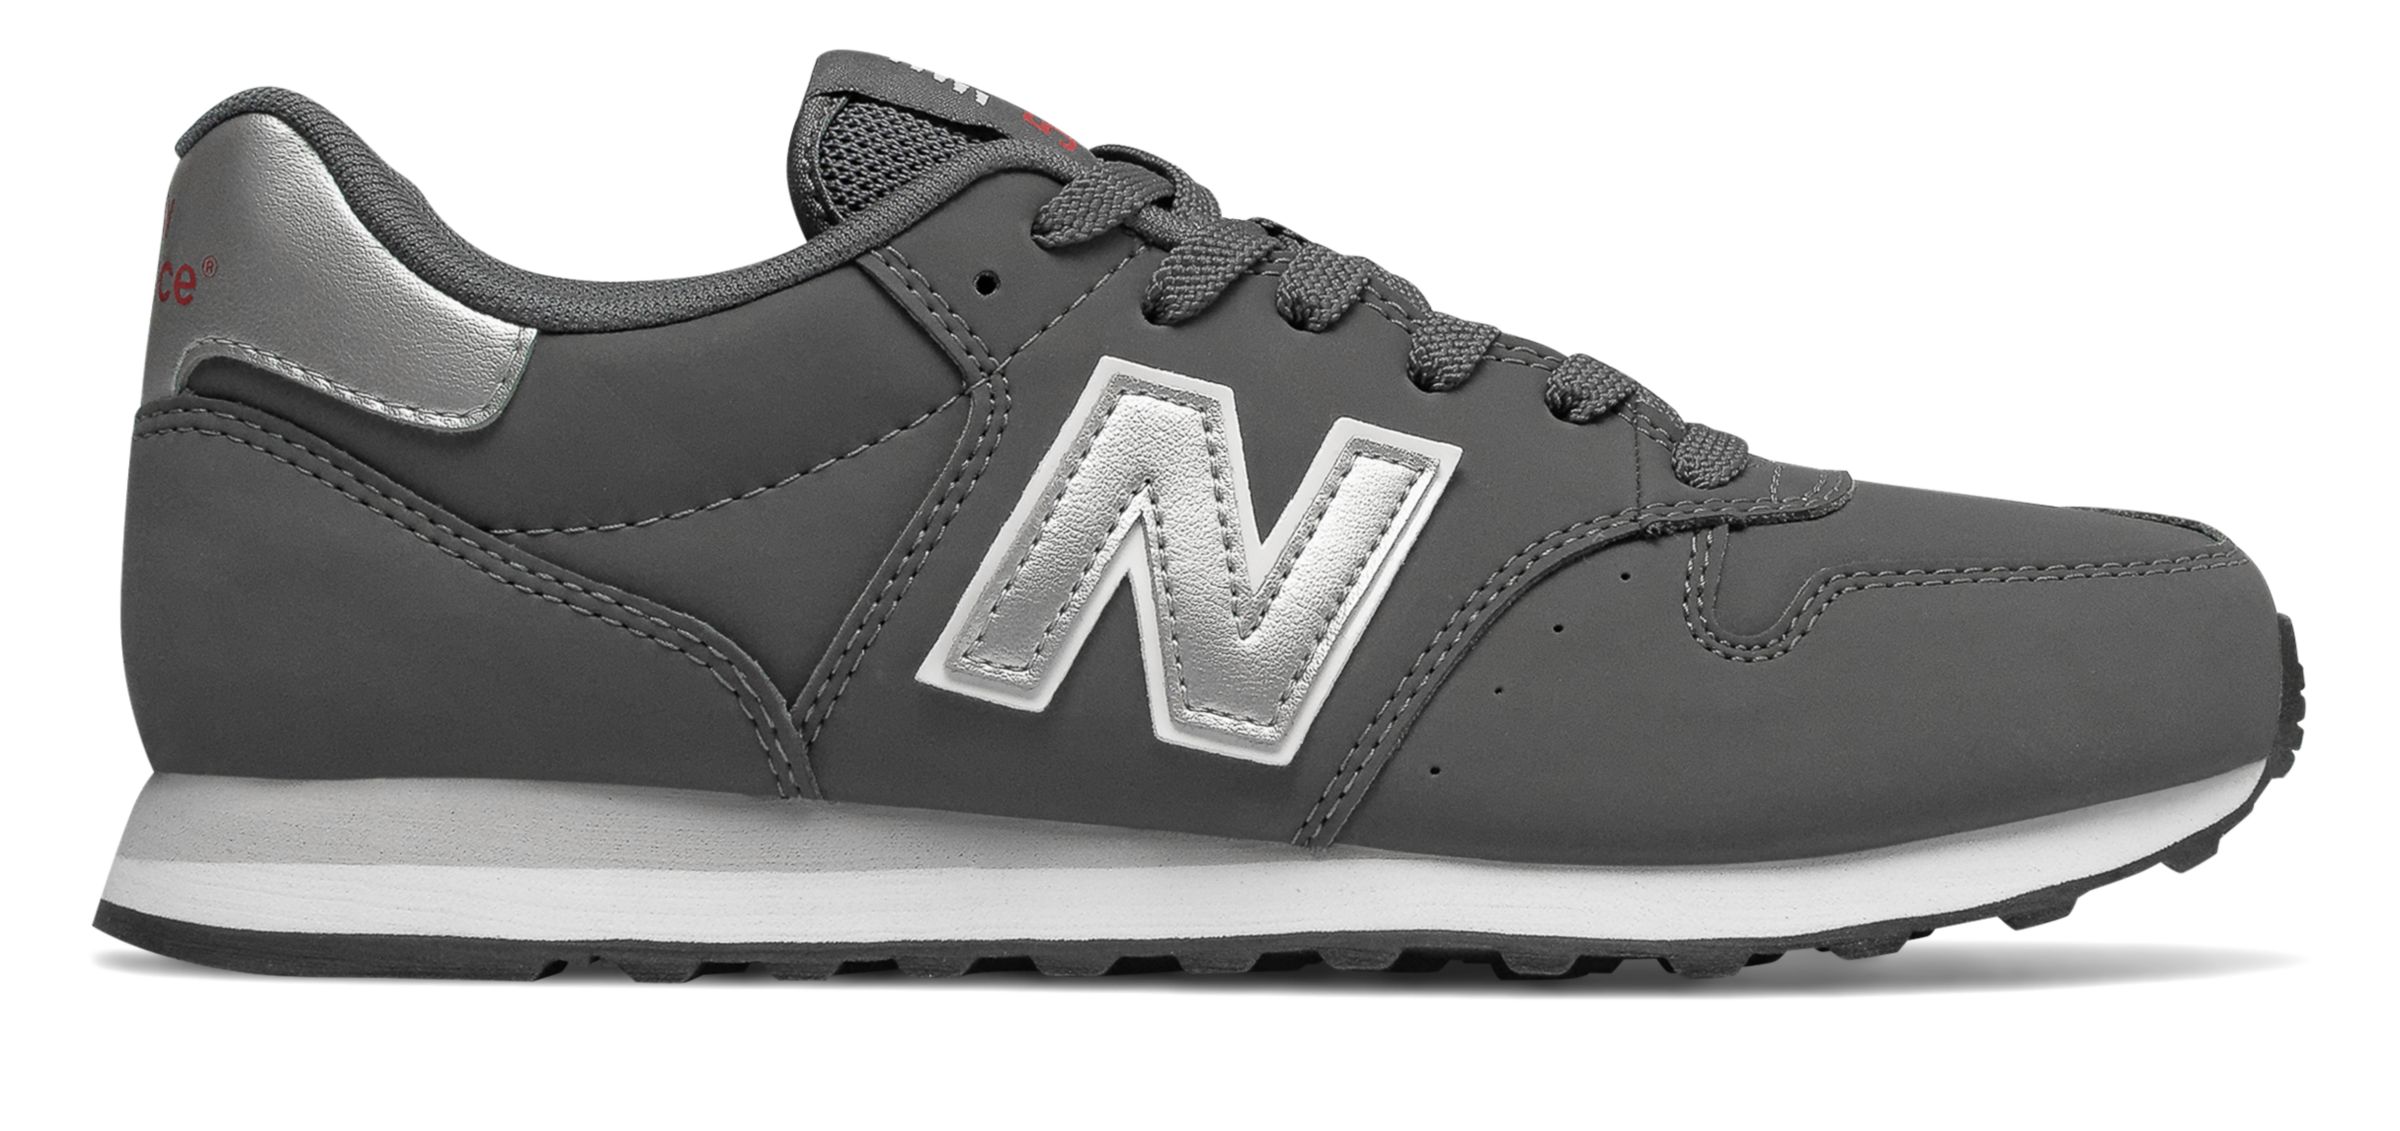 Classics Women's Shoes & Lifestyle Sneakers | New Balance